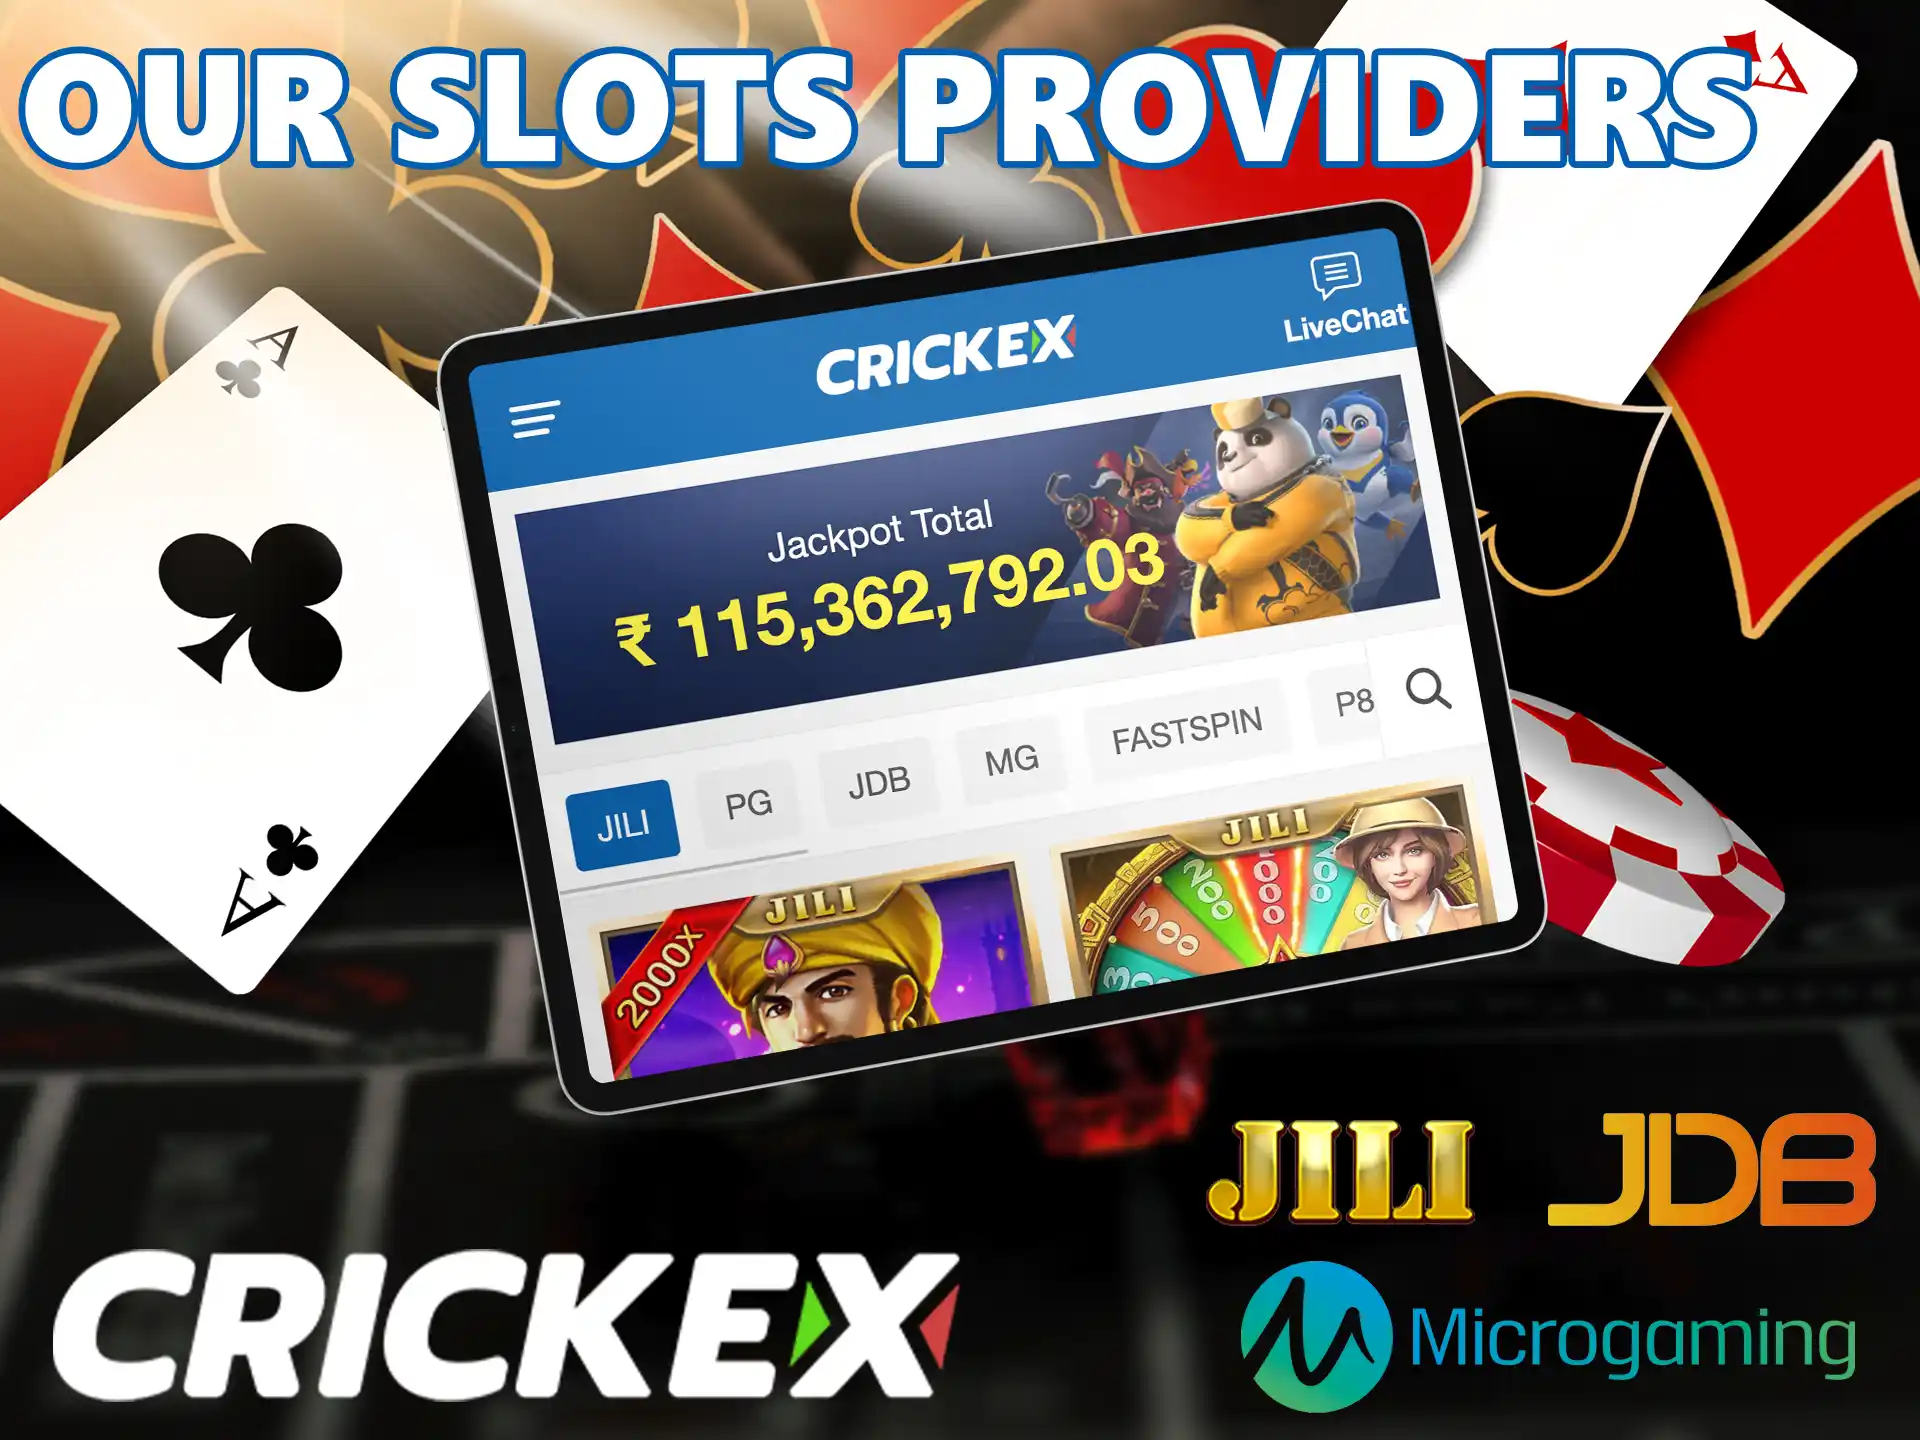 You will get the ultimate gaming experience as Crickex features only the top gaming providers.